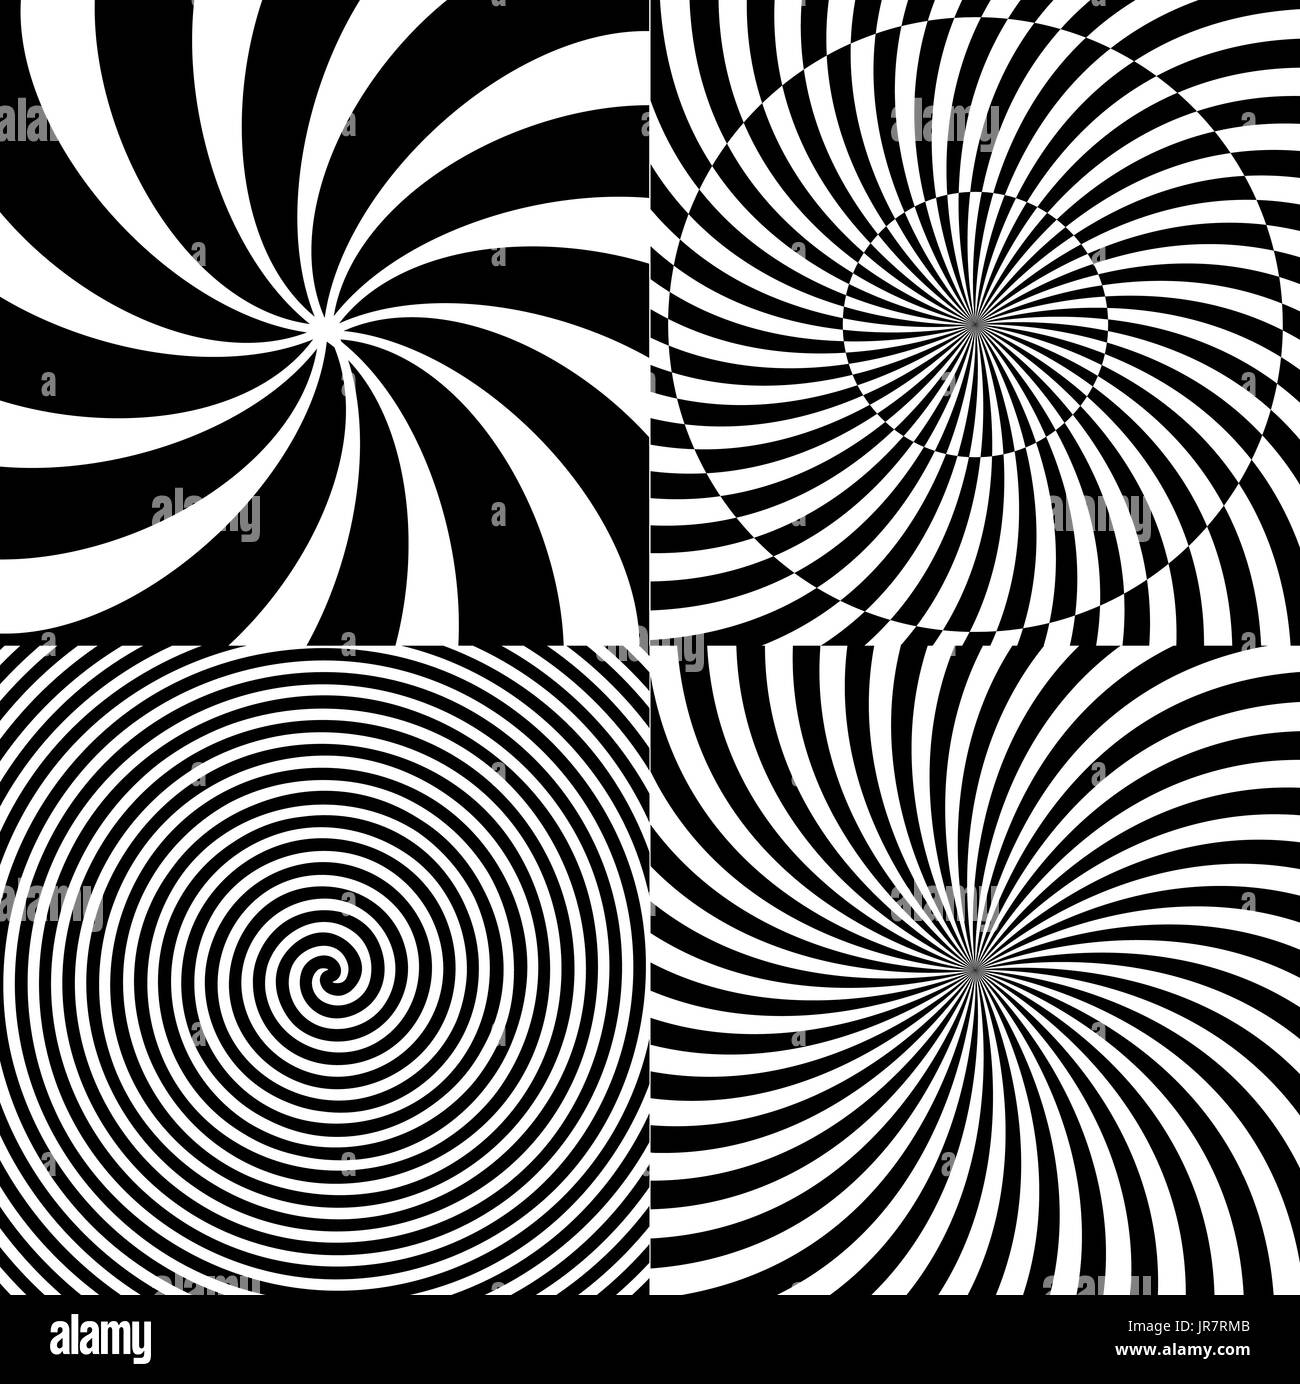 Black and White Hypnotic Psychedelic Spiral with Radial Rays, Twirl Background Collection Set Pattern. Vector Illustration Stock Vector